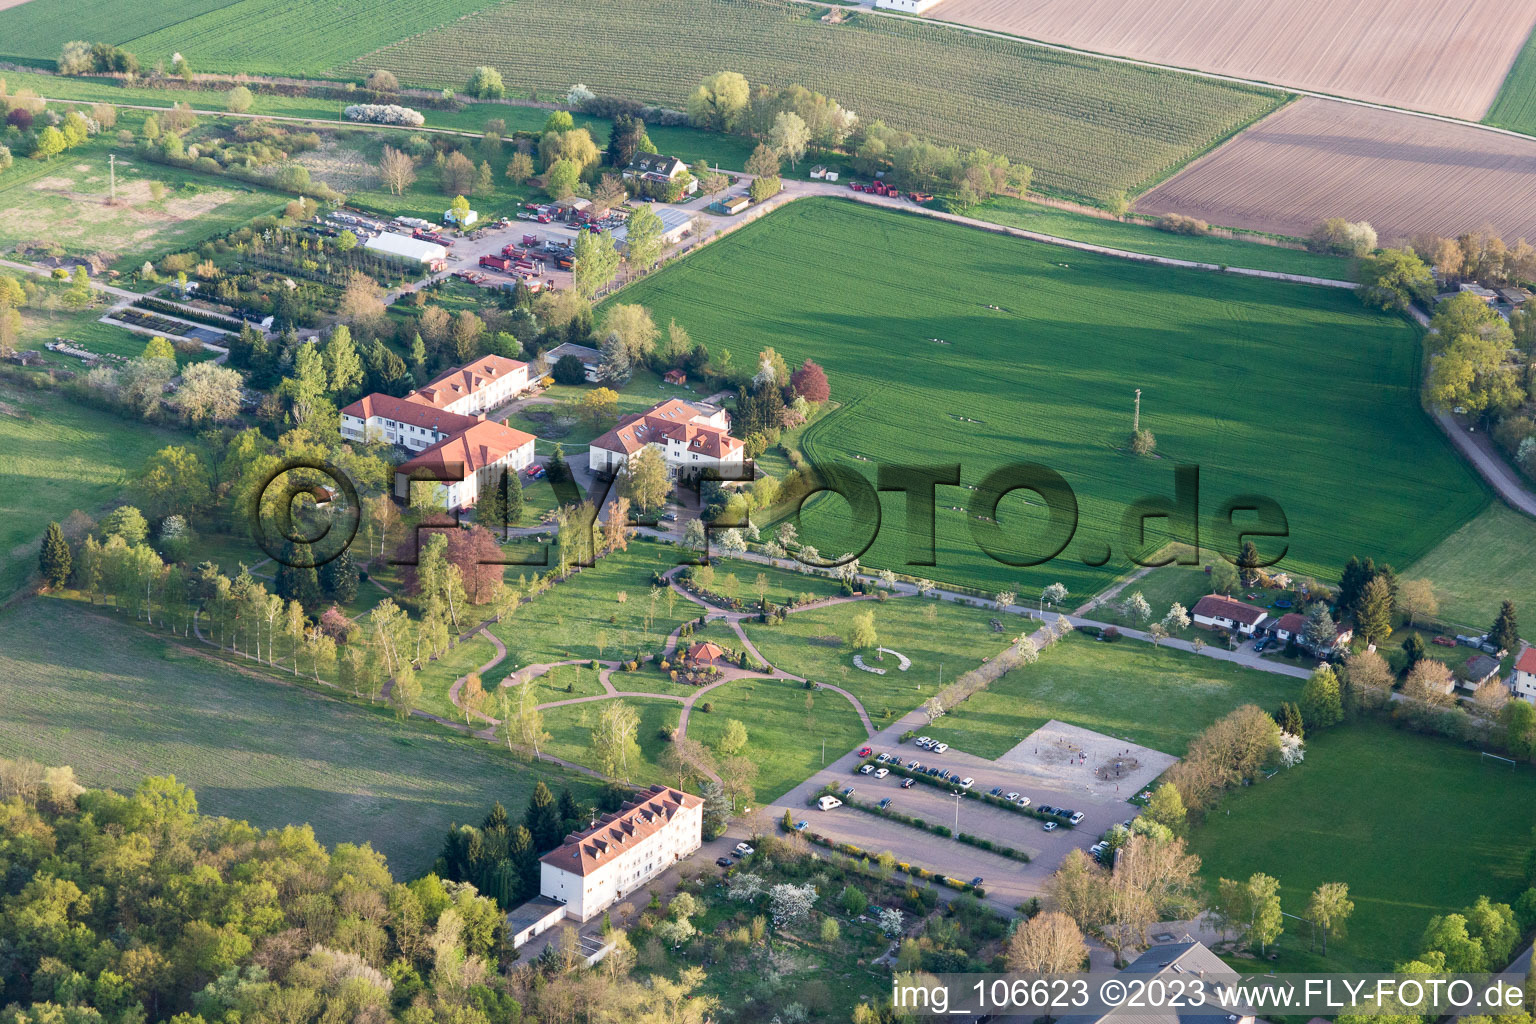 Aerial photograpy of Campus Lachen Deaconesses in the district Speyerdorf in Neustadt an der Weinstraße in the state Rhineland-Palatinate, Germany